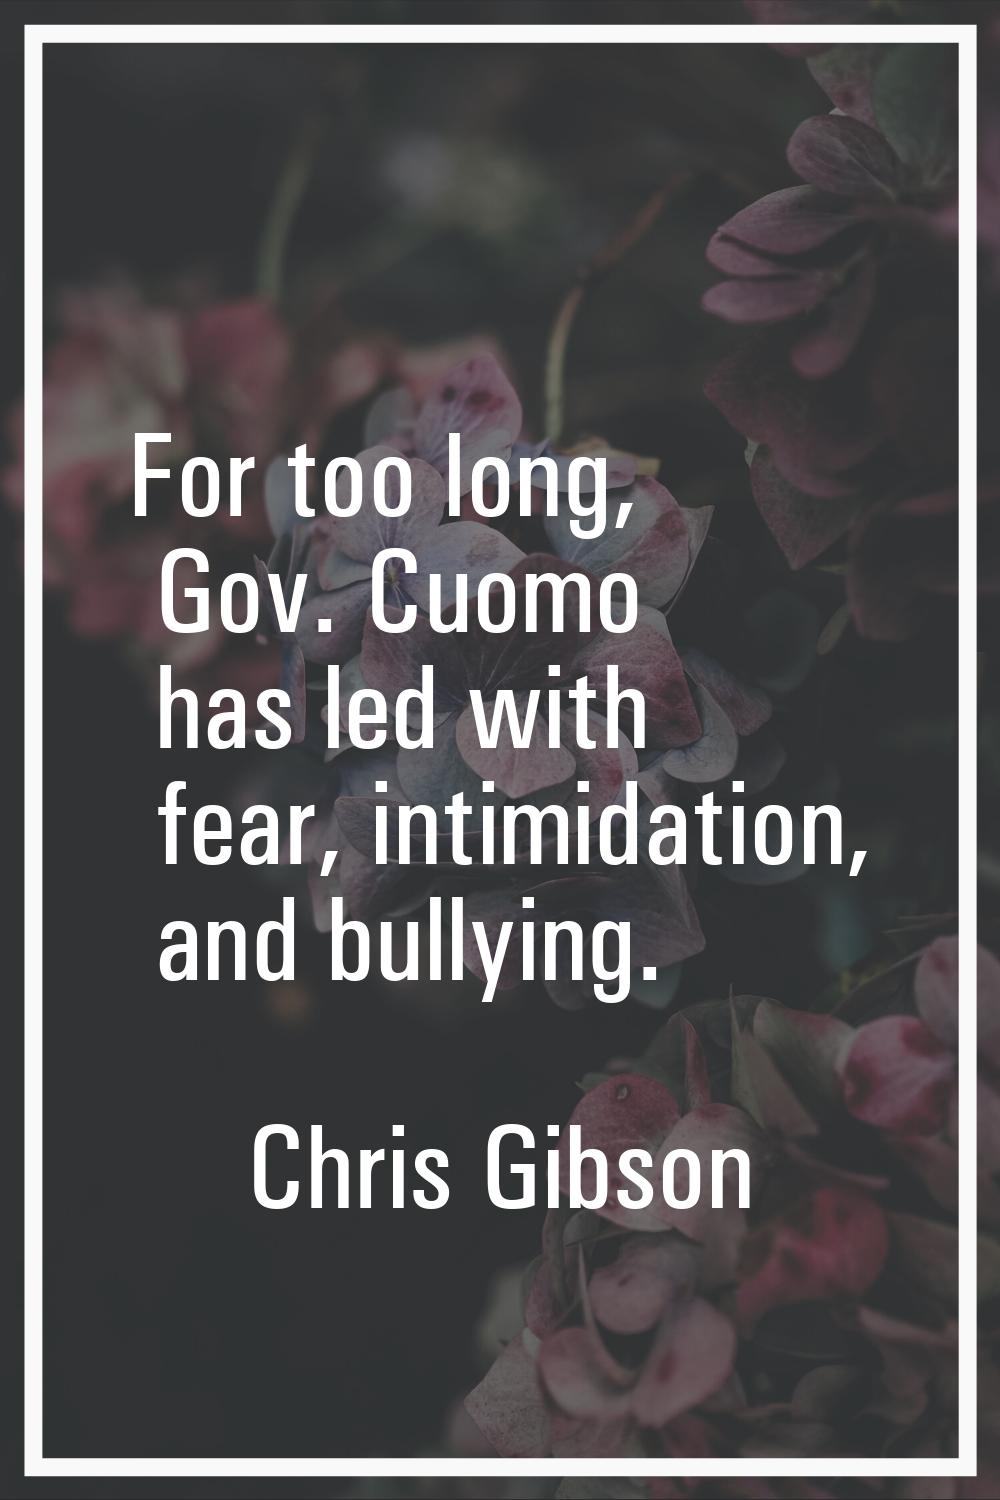 For too long, Gov. Cuomo has led with fear, intimidation, and bullying.